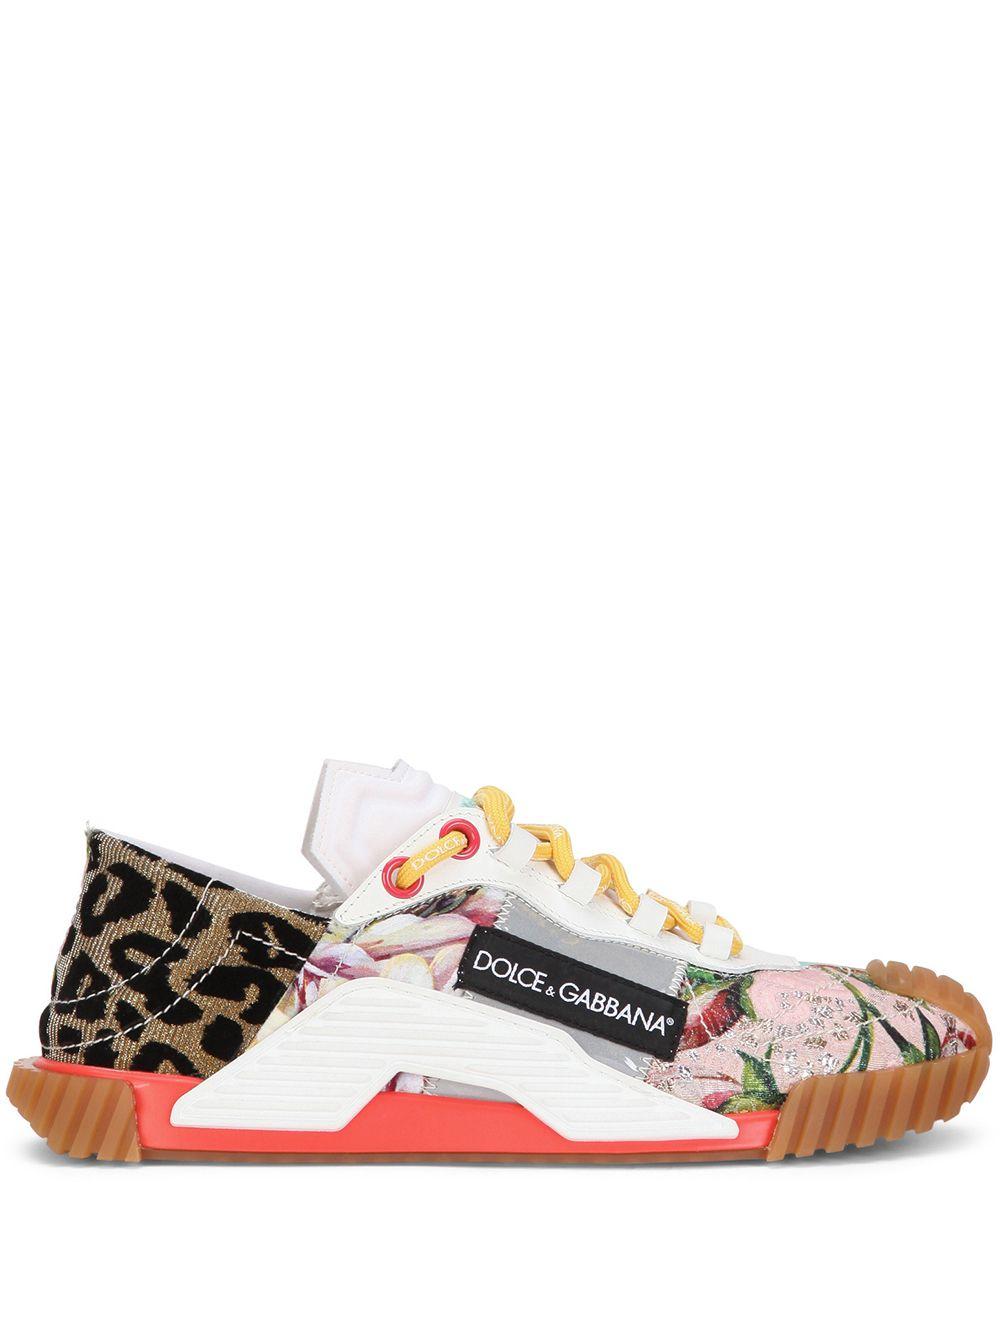 Dolce & Gabbana Patchwork Low-top Sneakers in White | Lyst